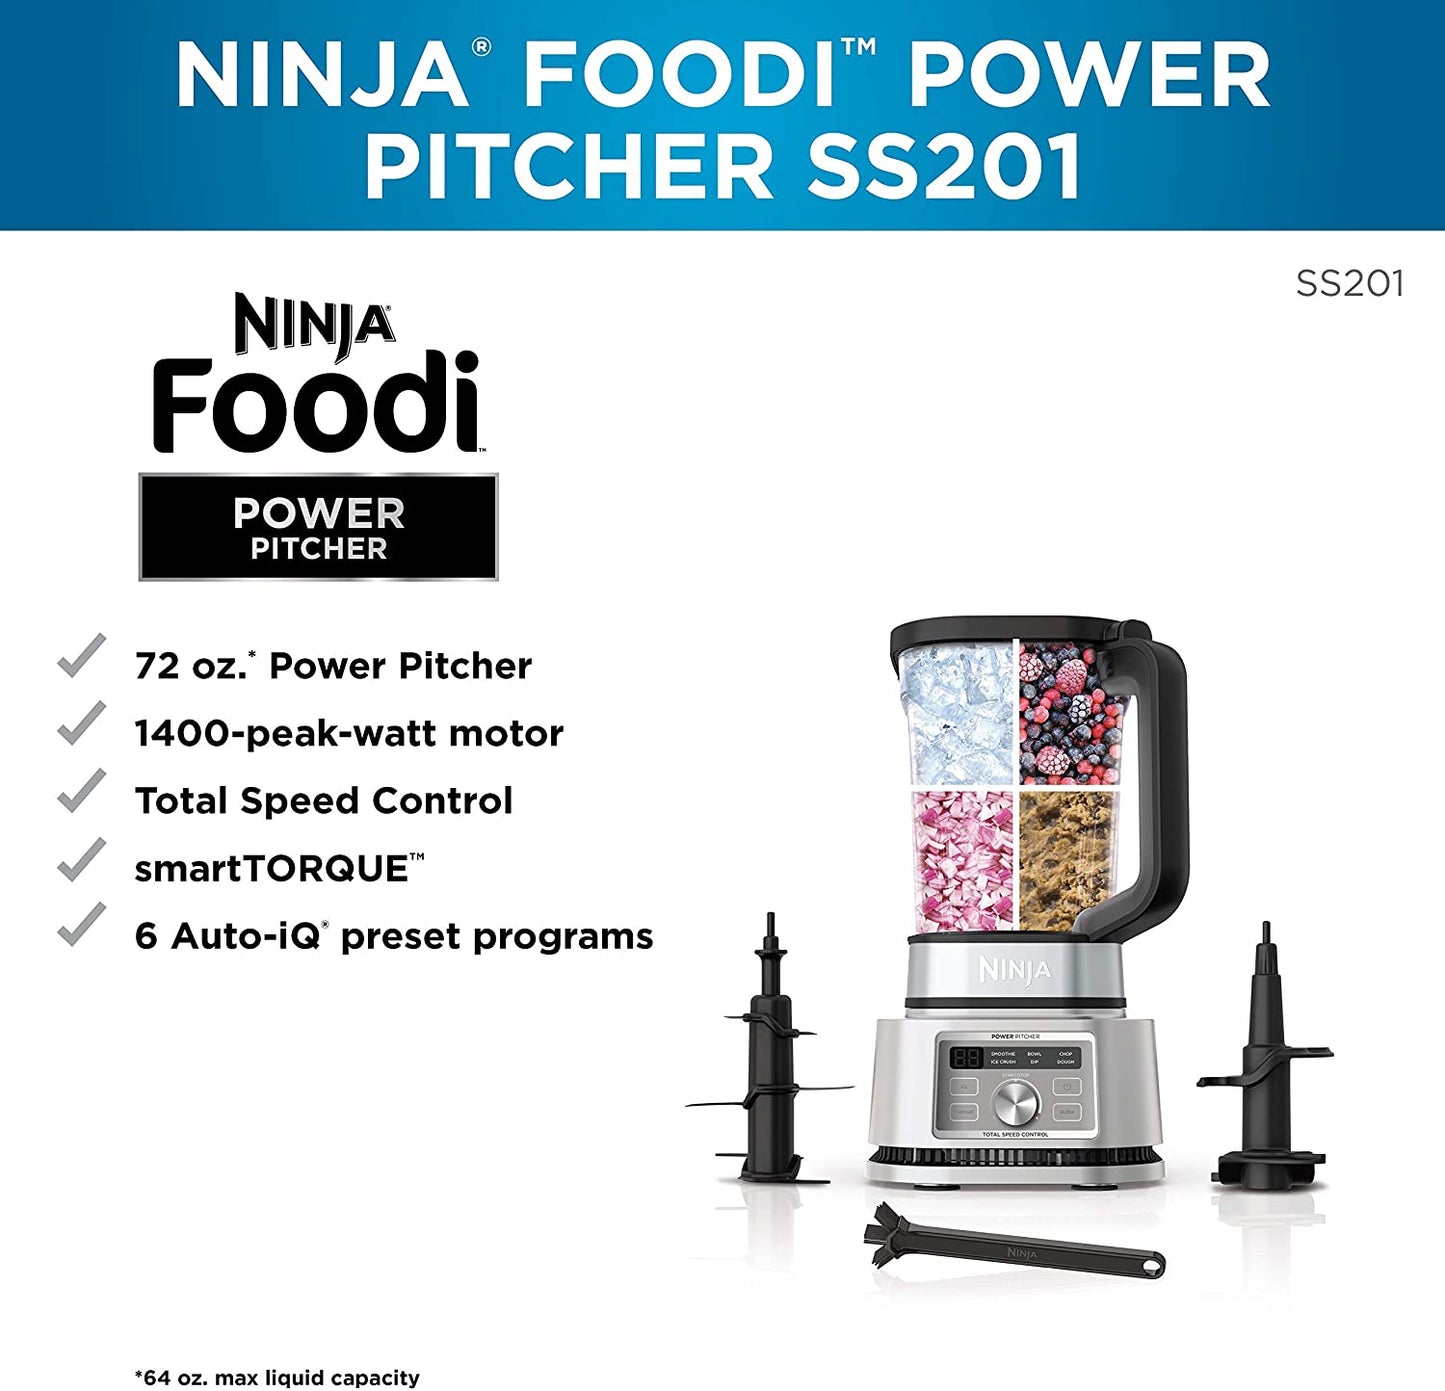 Ninja SS201 Foodi Power Pitcher 4In1 Smoothie Bowl Maker Crushing Blender Dough Mixer Food Processor 1400WP Smarttorque 6 Auto-Iq Presets, with a Stainless Silver Finish (Renewed) (Ninja SS201)